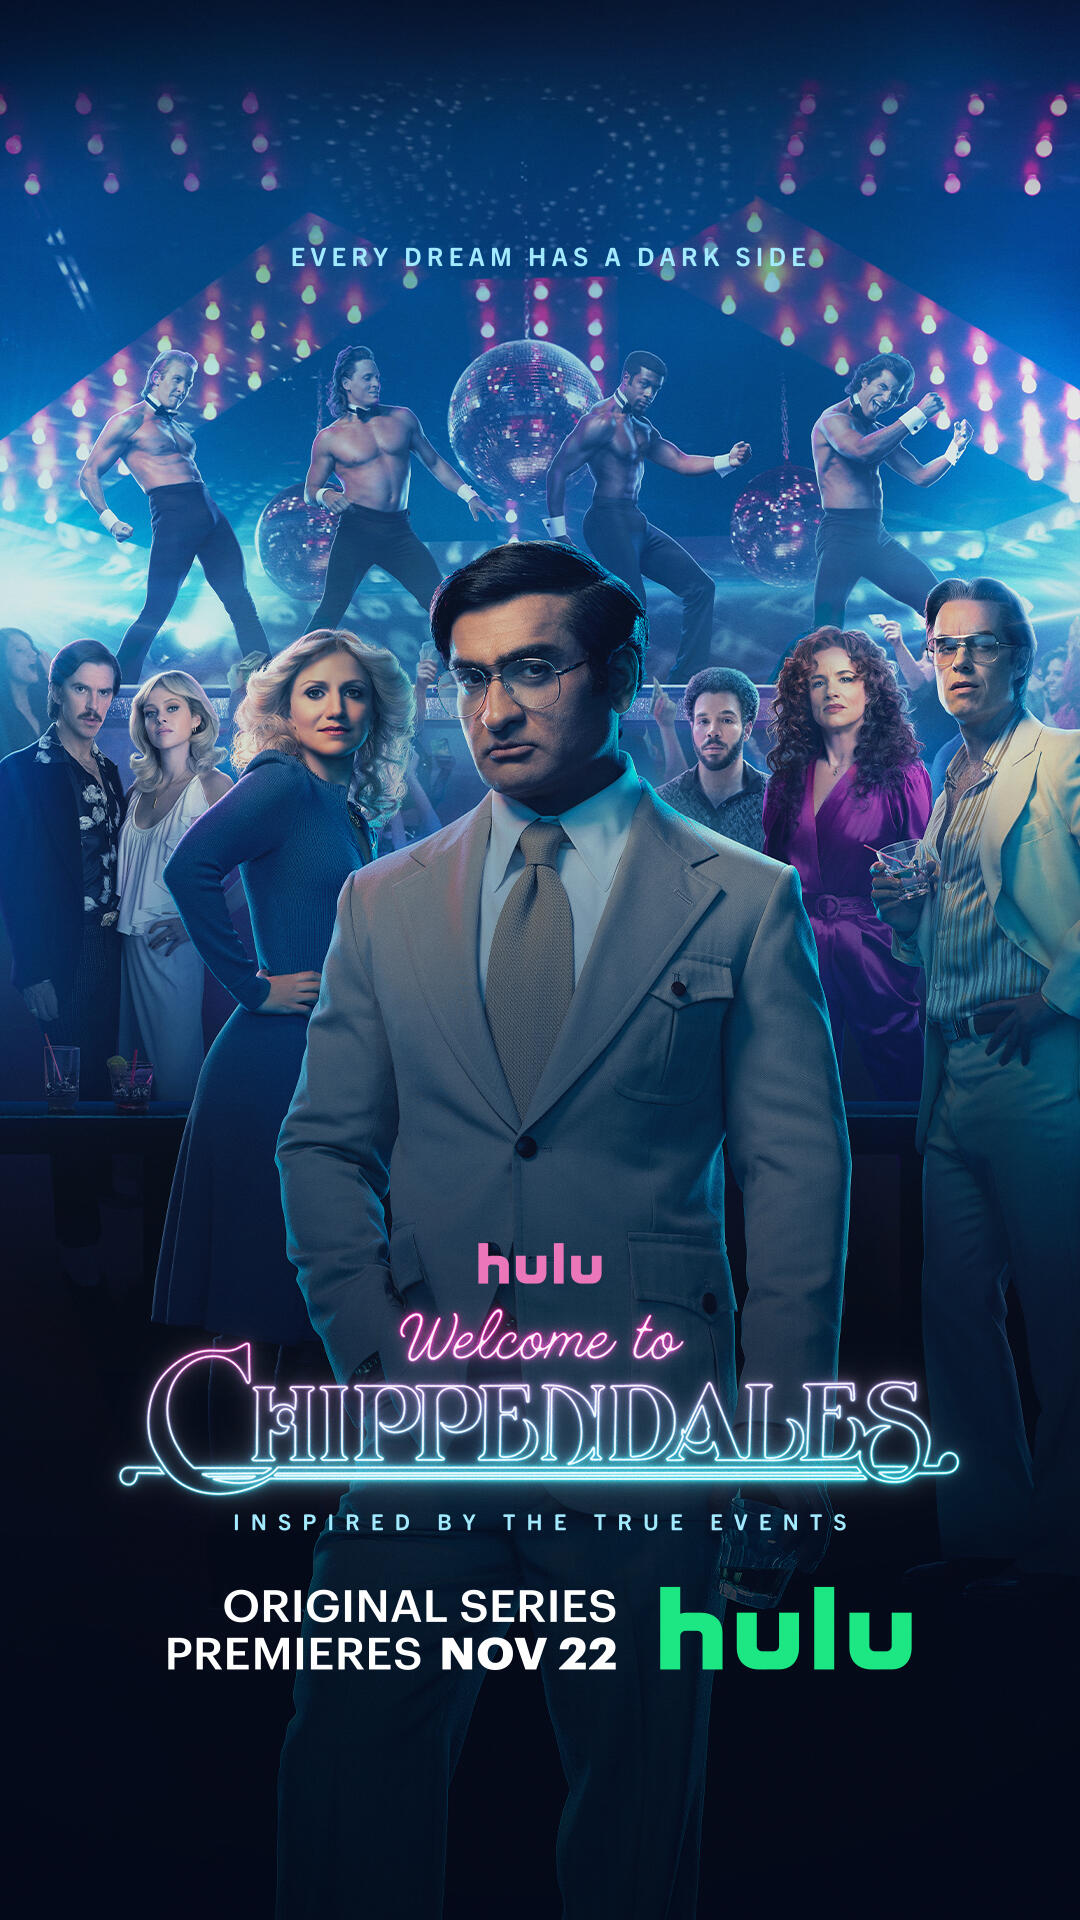 welcome-to-Chippendales-poster